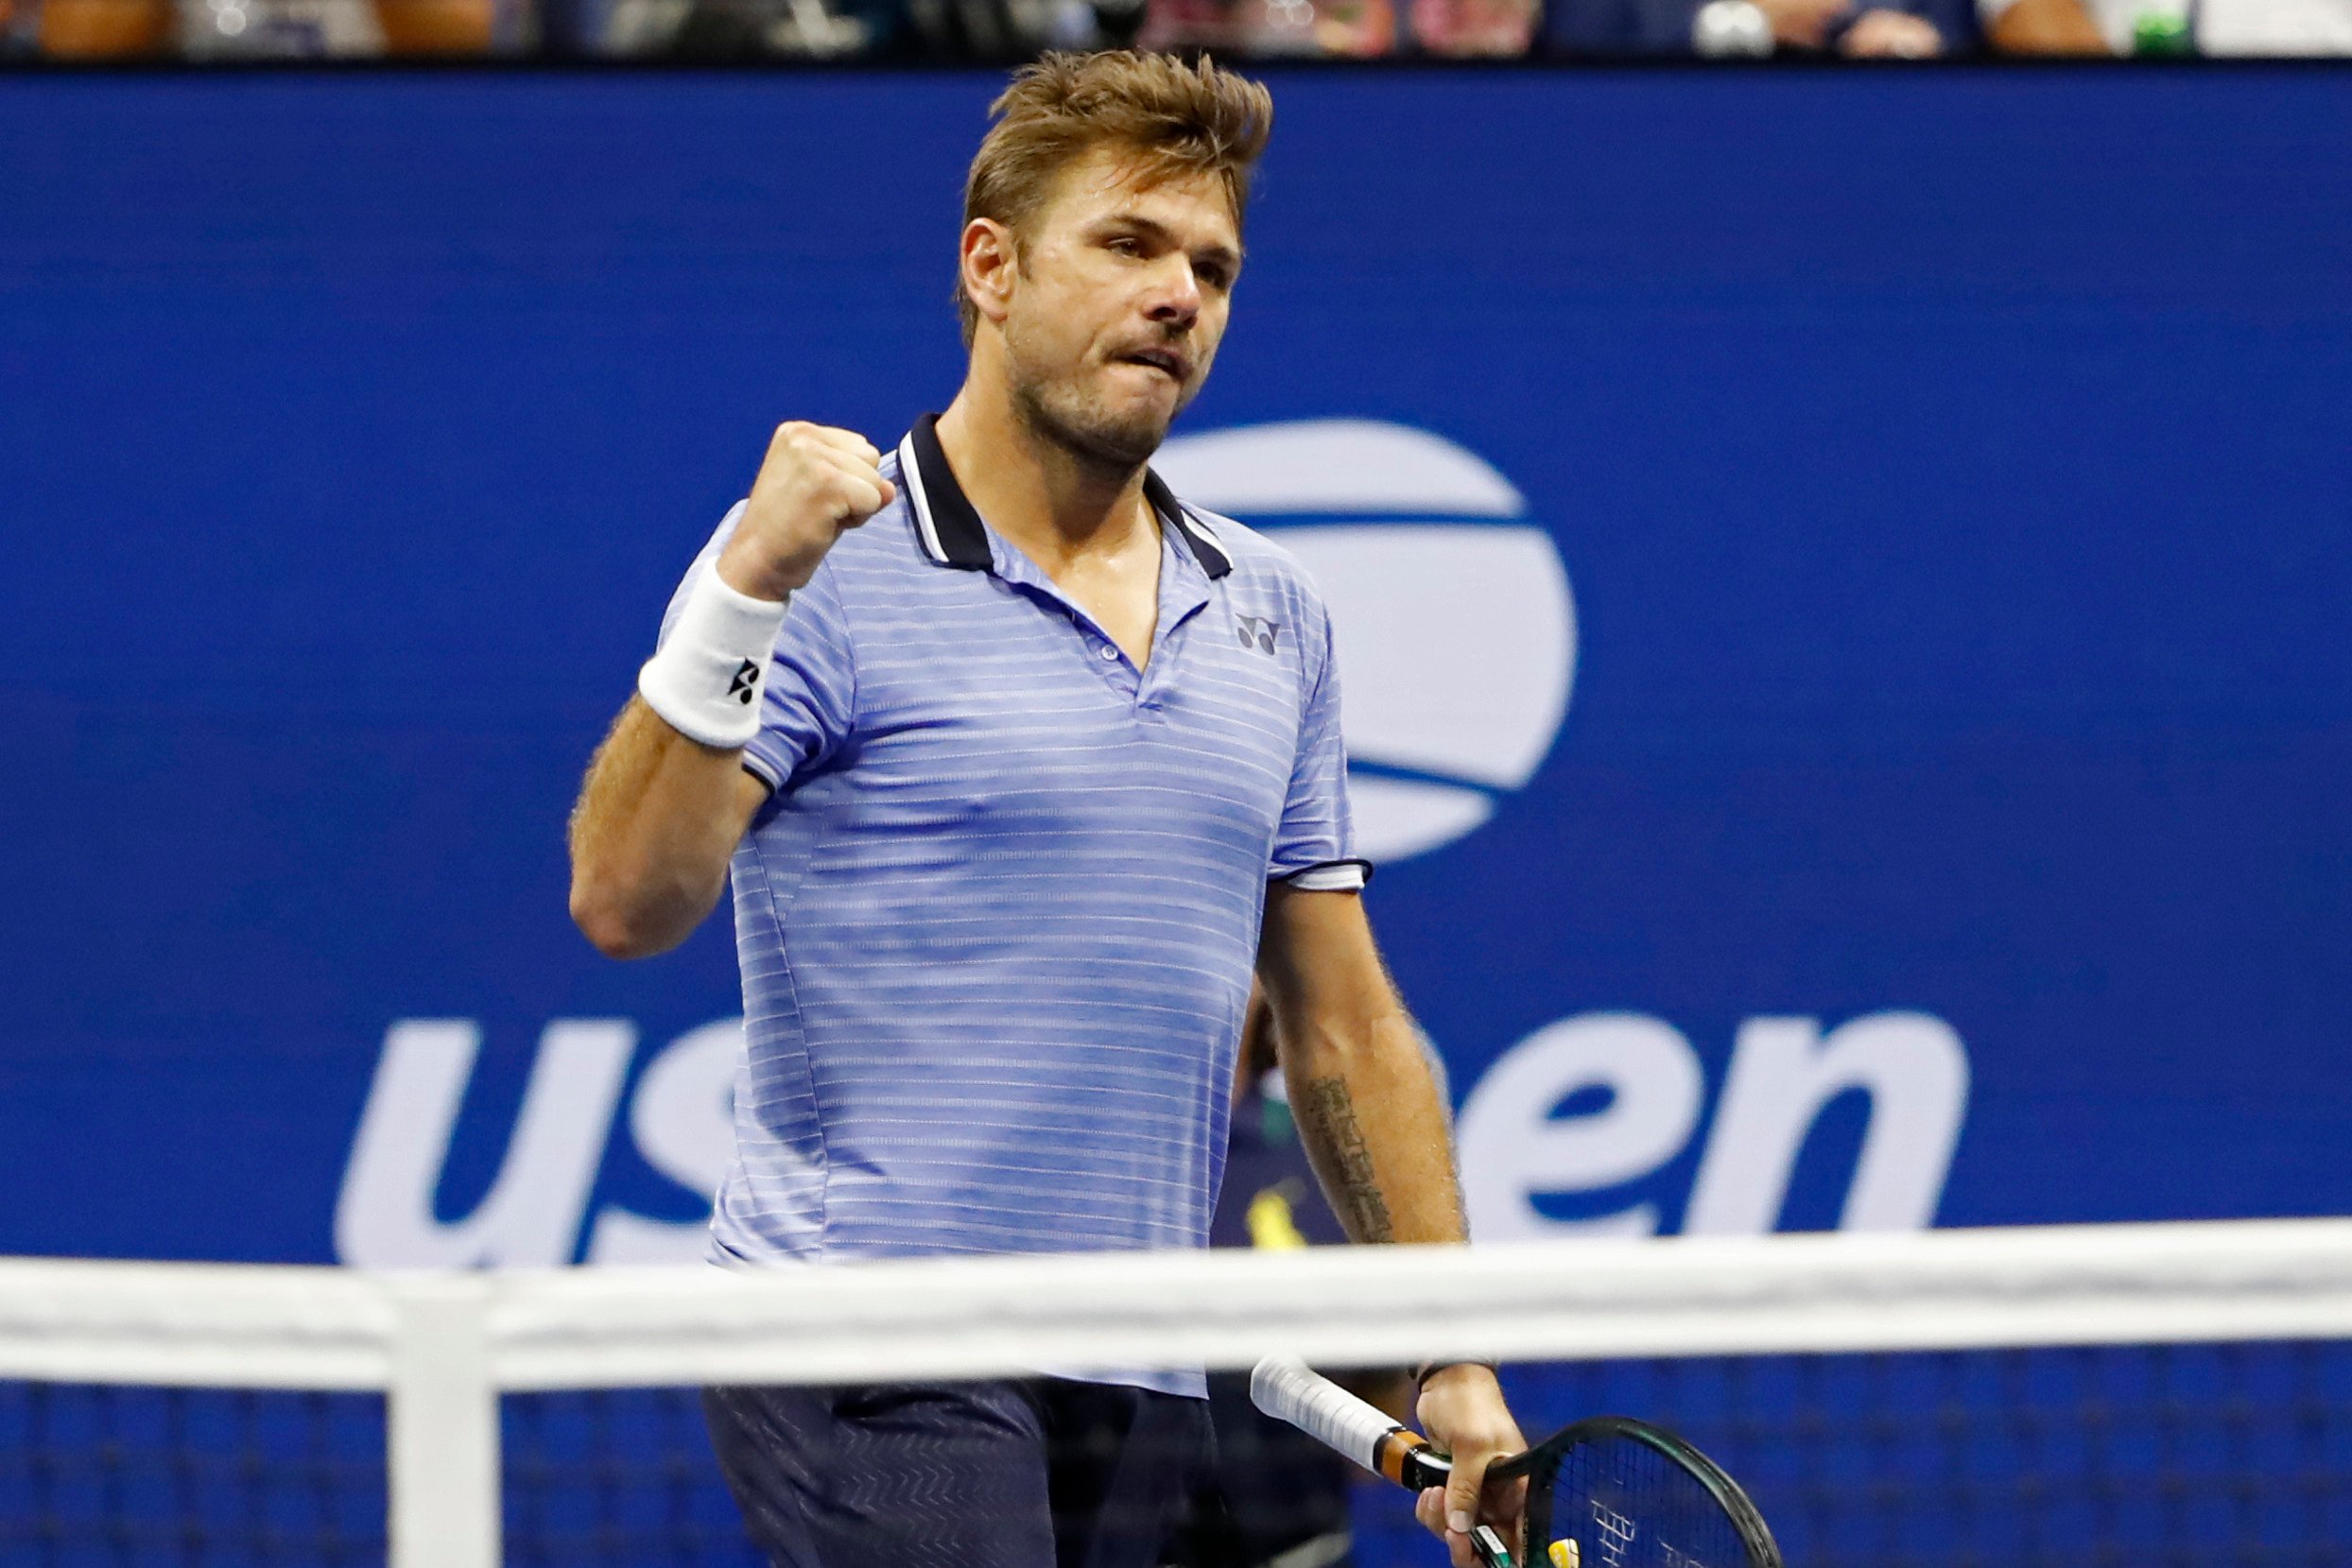 Stanislas Wawrinka of Switzerland during a match against Novak Djokovic in the fourth round of the 2019 US Open. Photo: USA TODAY Sports